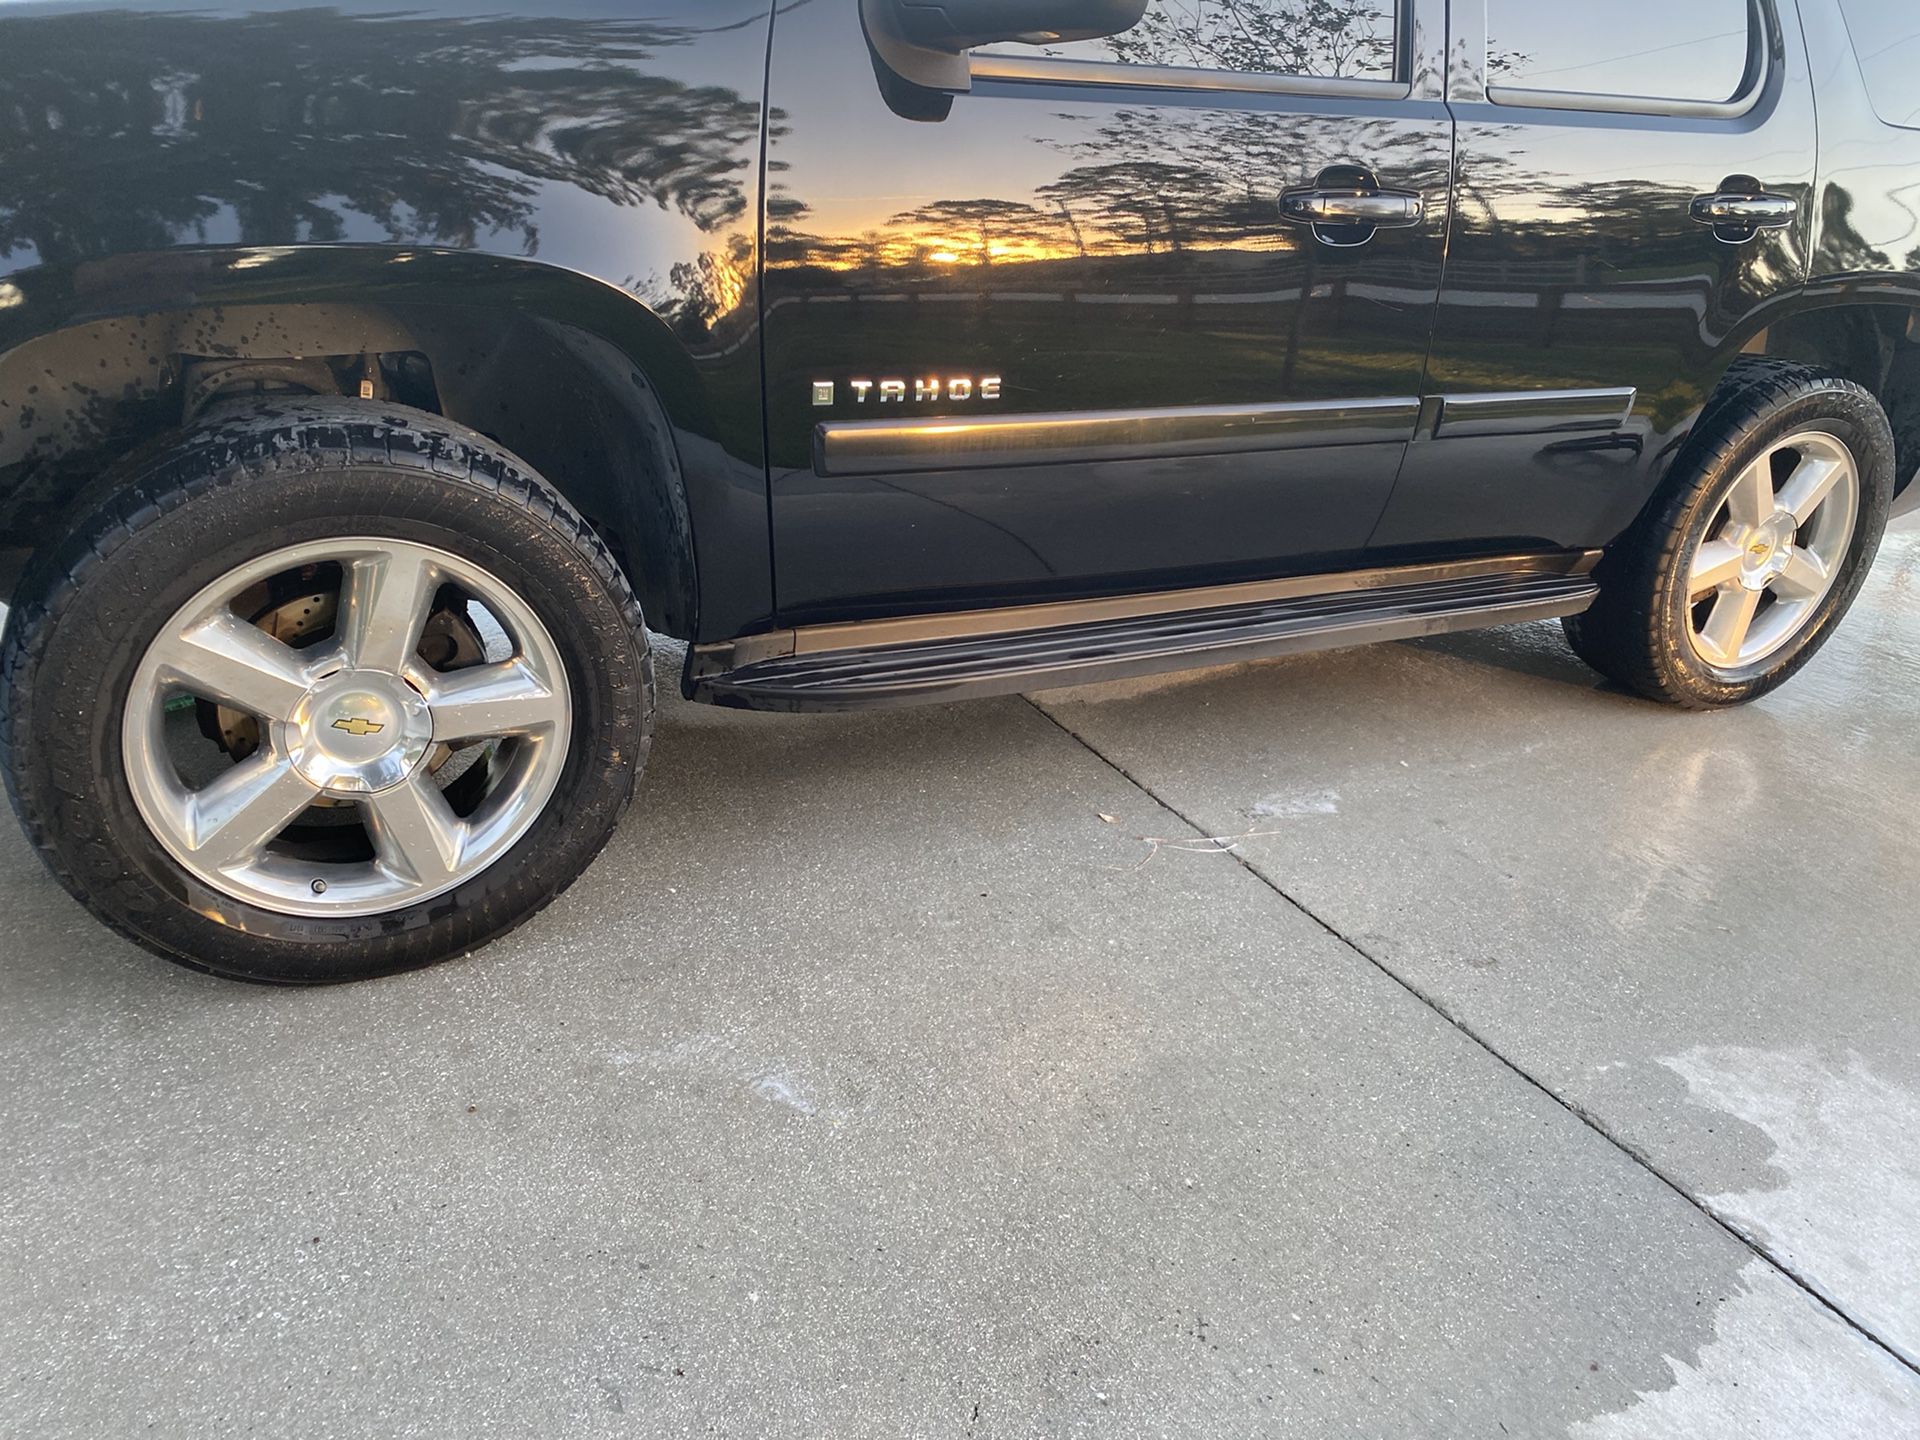 Chevy LTZ wheels and tires